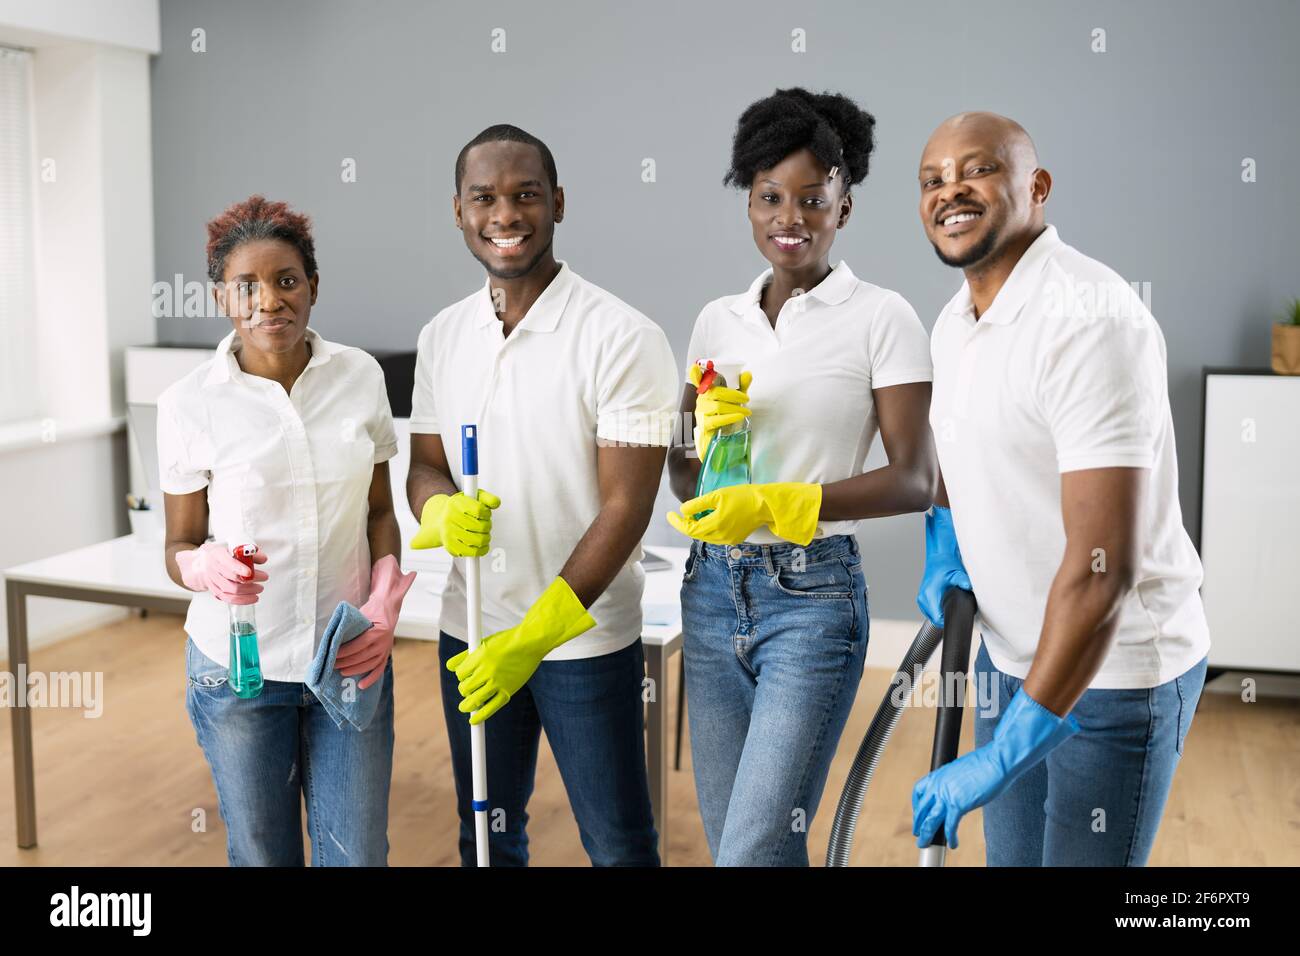 African Commercial Janitor Cleaning Staff. Cleaner Service Stock Photo